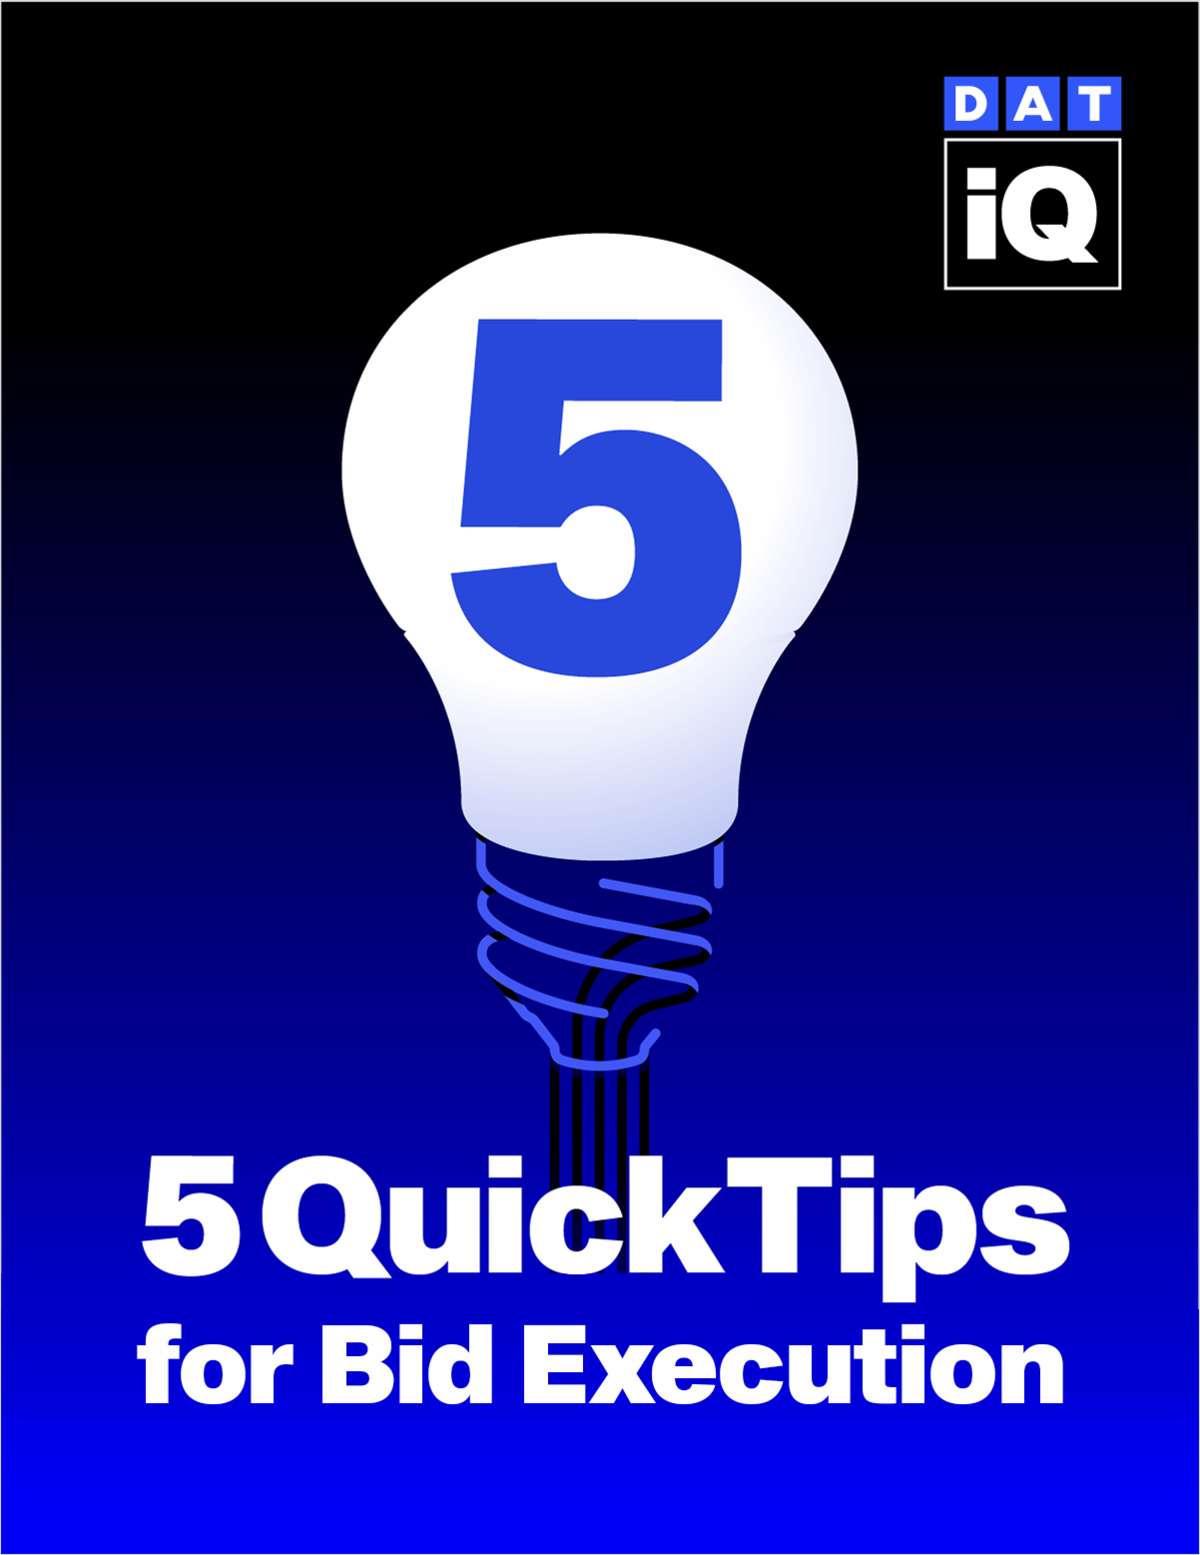 Quick Tips for Bid Execution